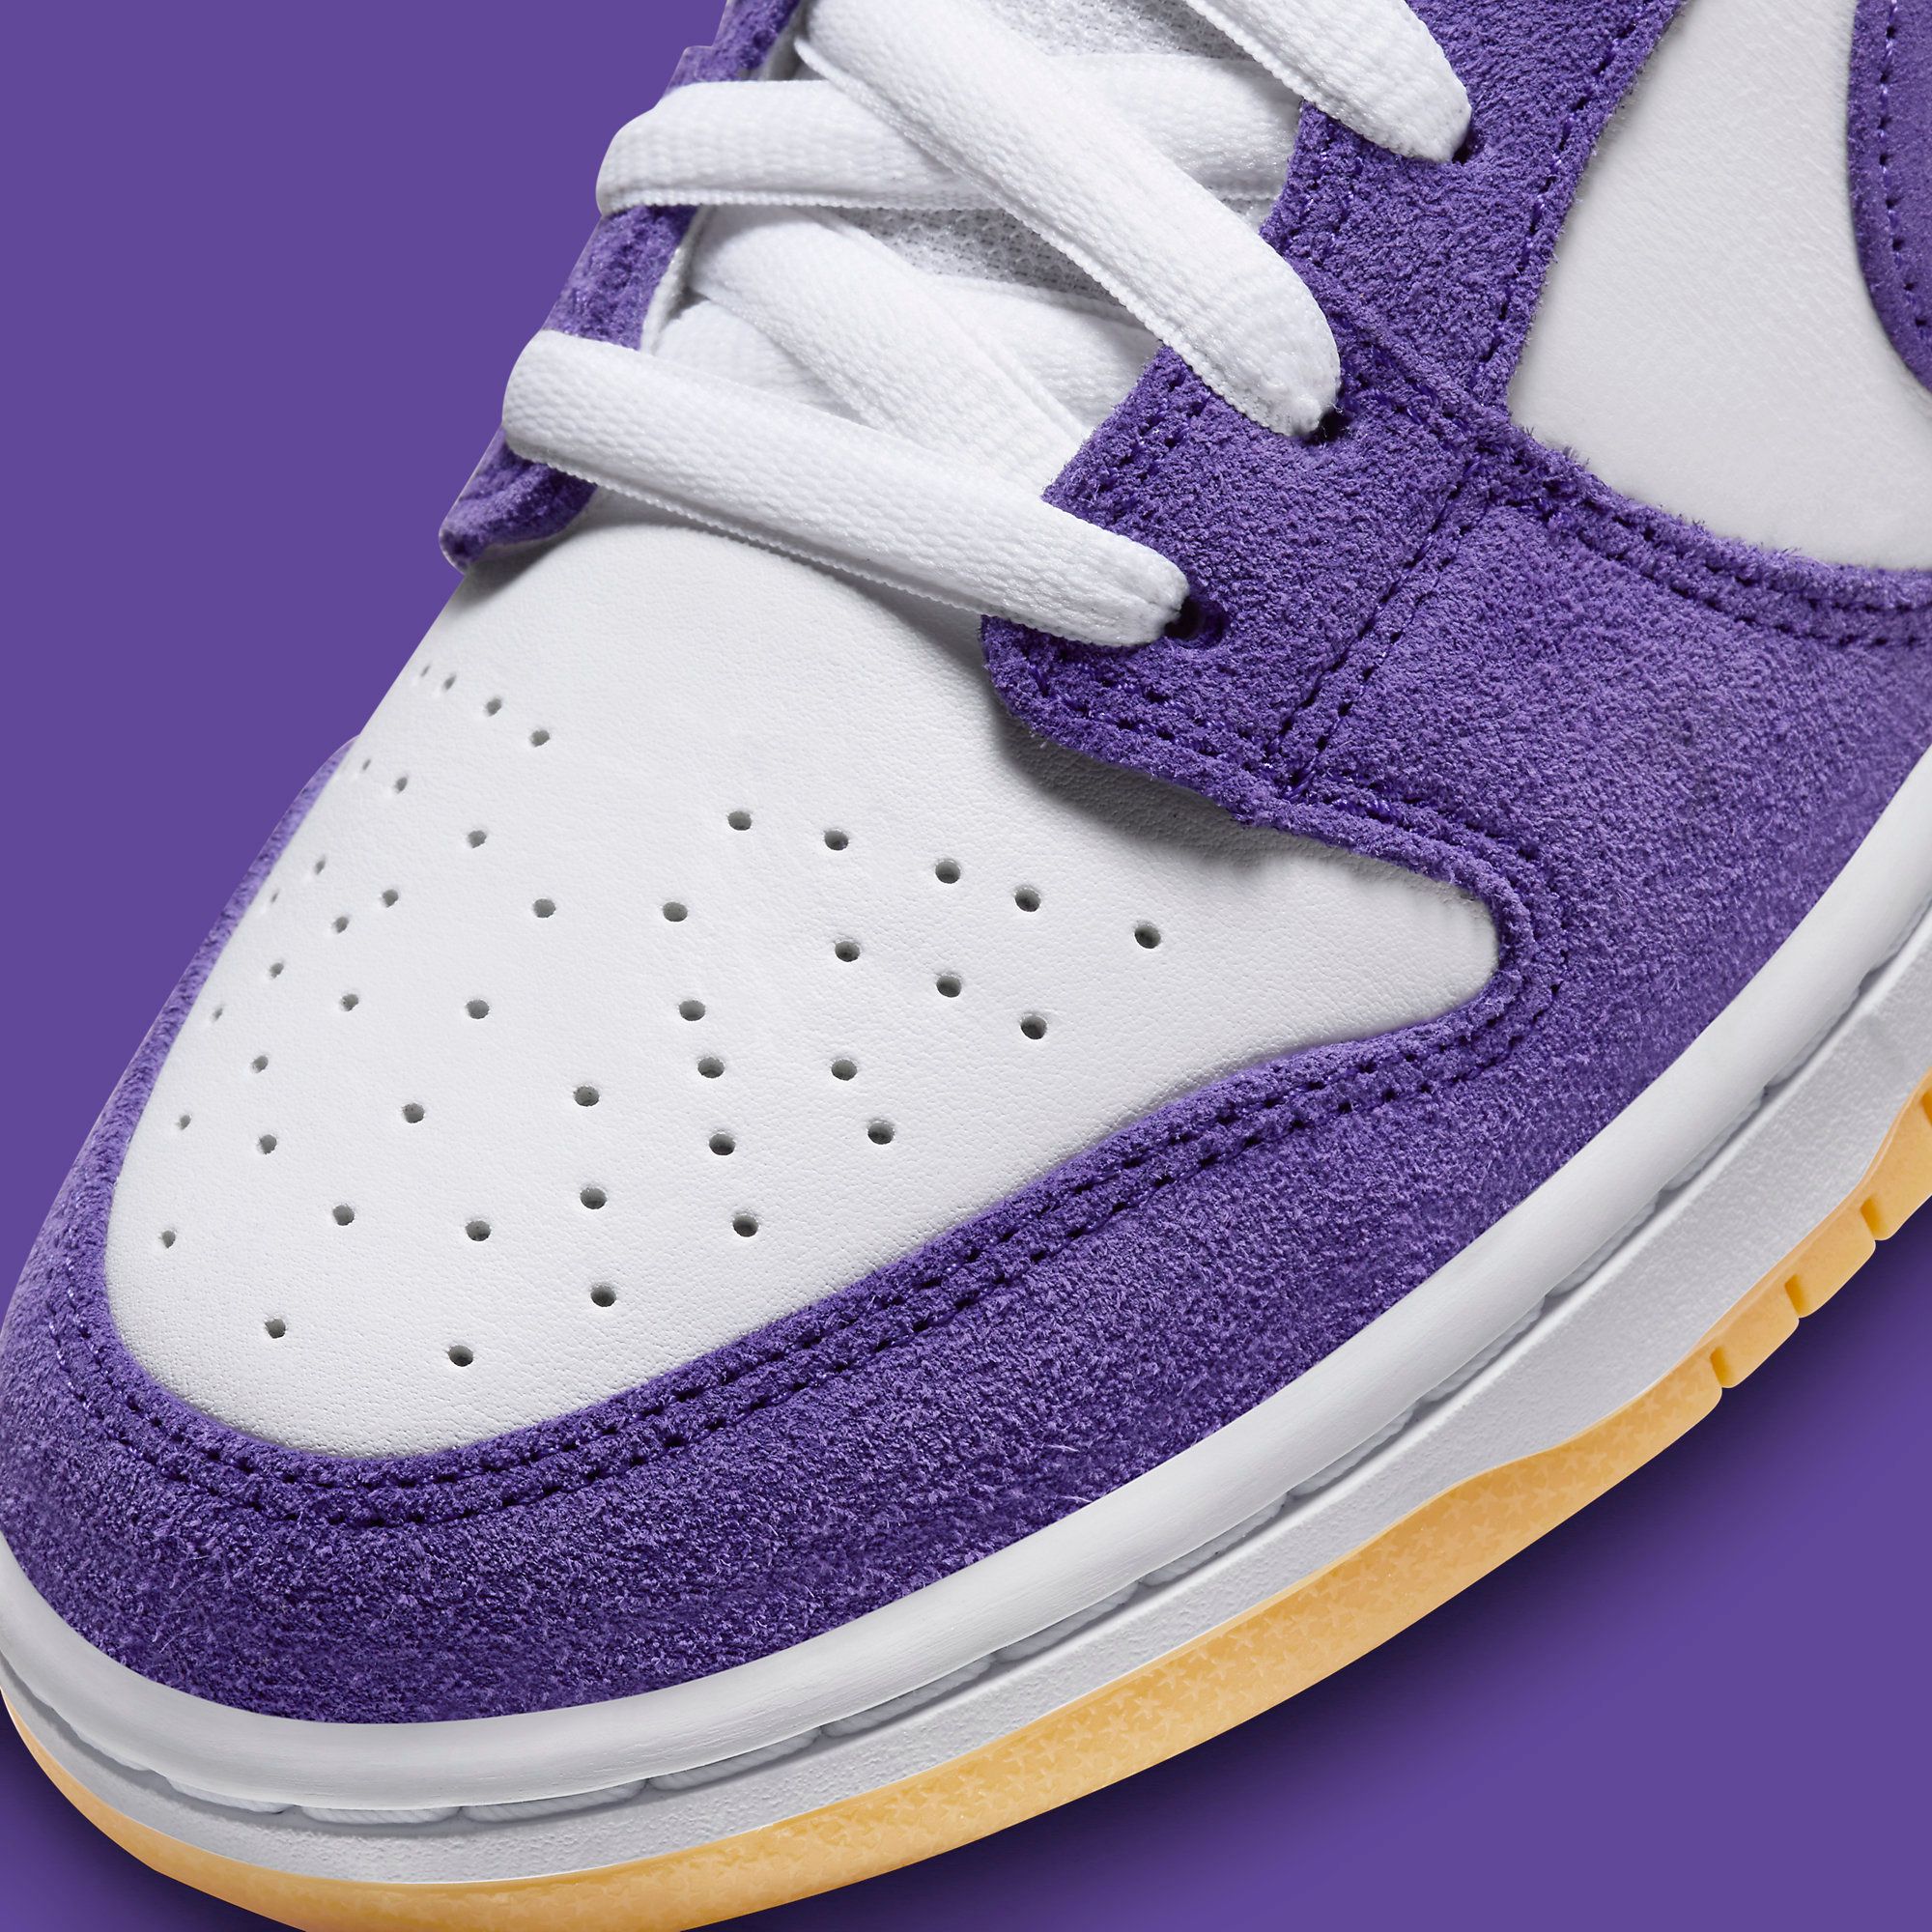 Official Images // Nike SB Dunk Low “Purple Suede” | House of Heat°